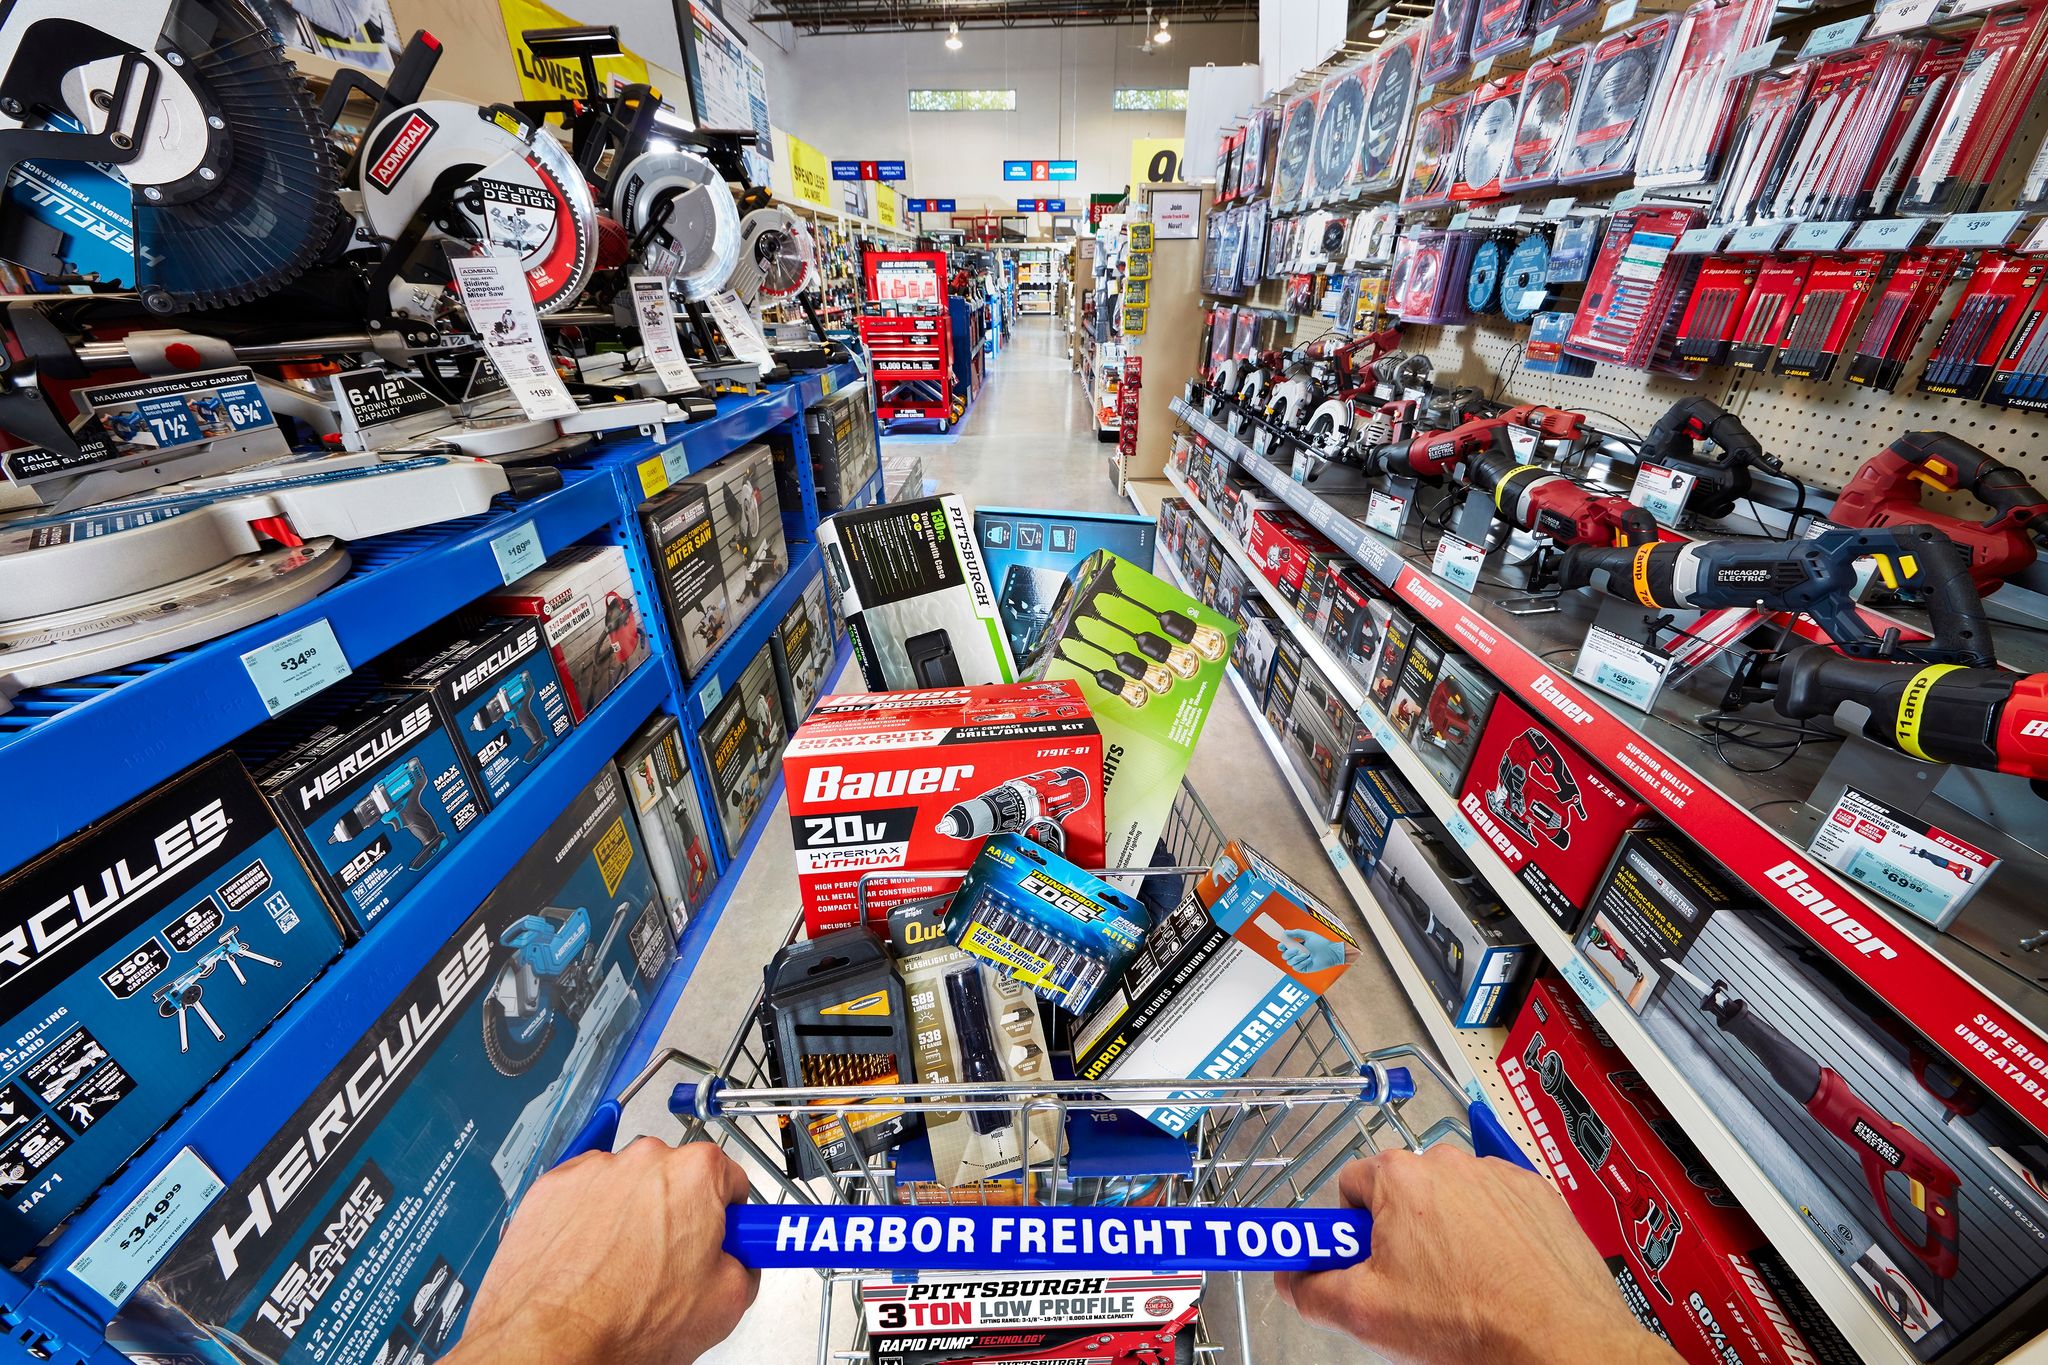 HARBOR FREIGHT TOOLS TO OPEN NEW STORE IN SUNNYSIDE ON JULY 9 - Harbor  Freight Newsroom